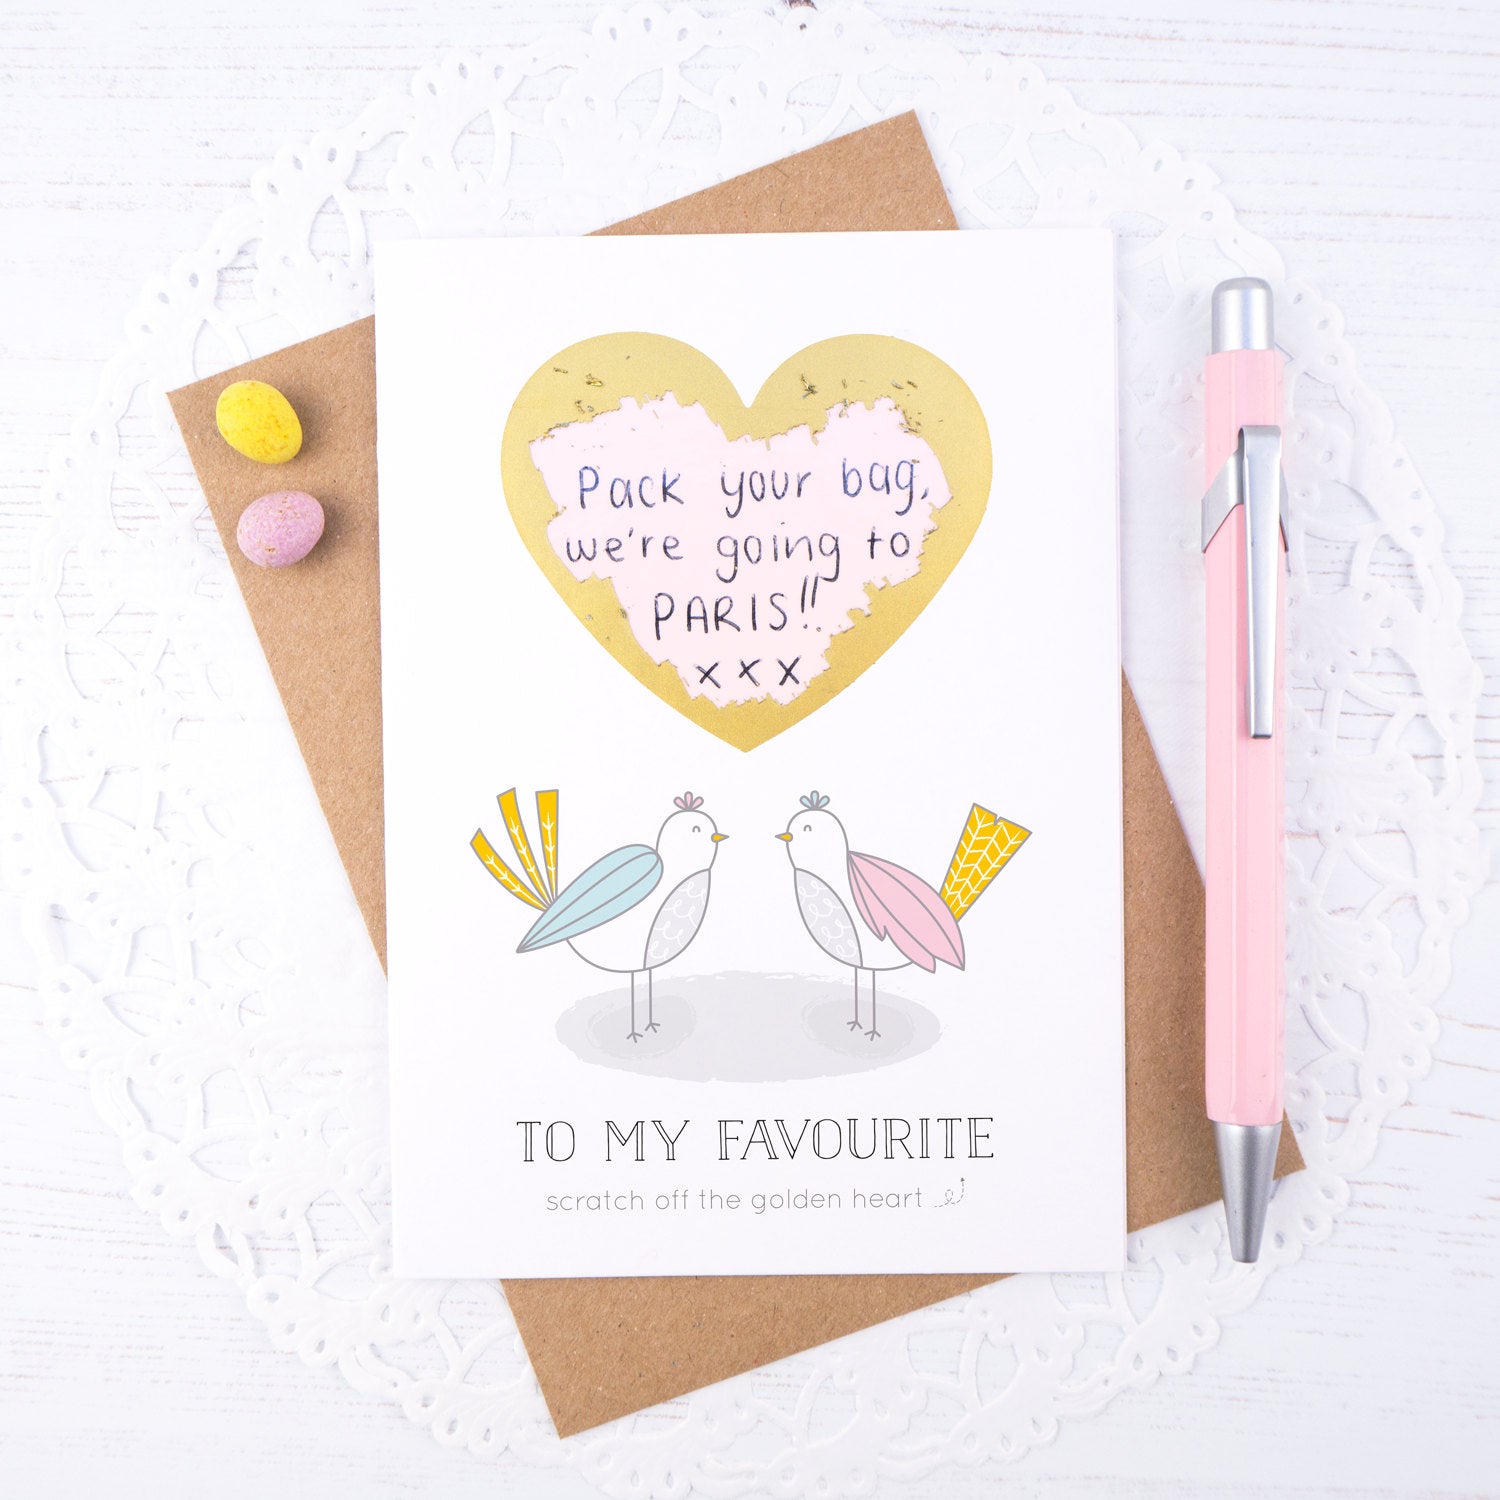 To my favourite scratch card - a love birds card for hiding a secret message to your favourite person. Ideal for valentines or anniversaries.